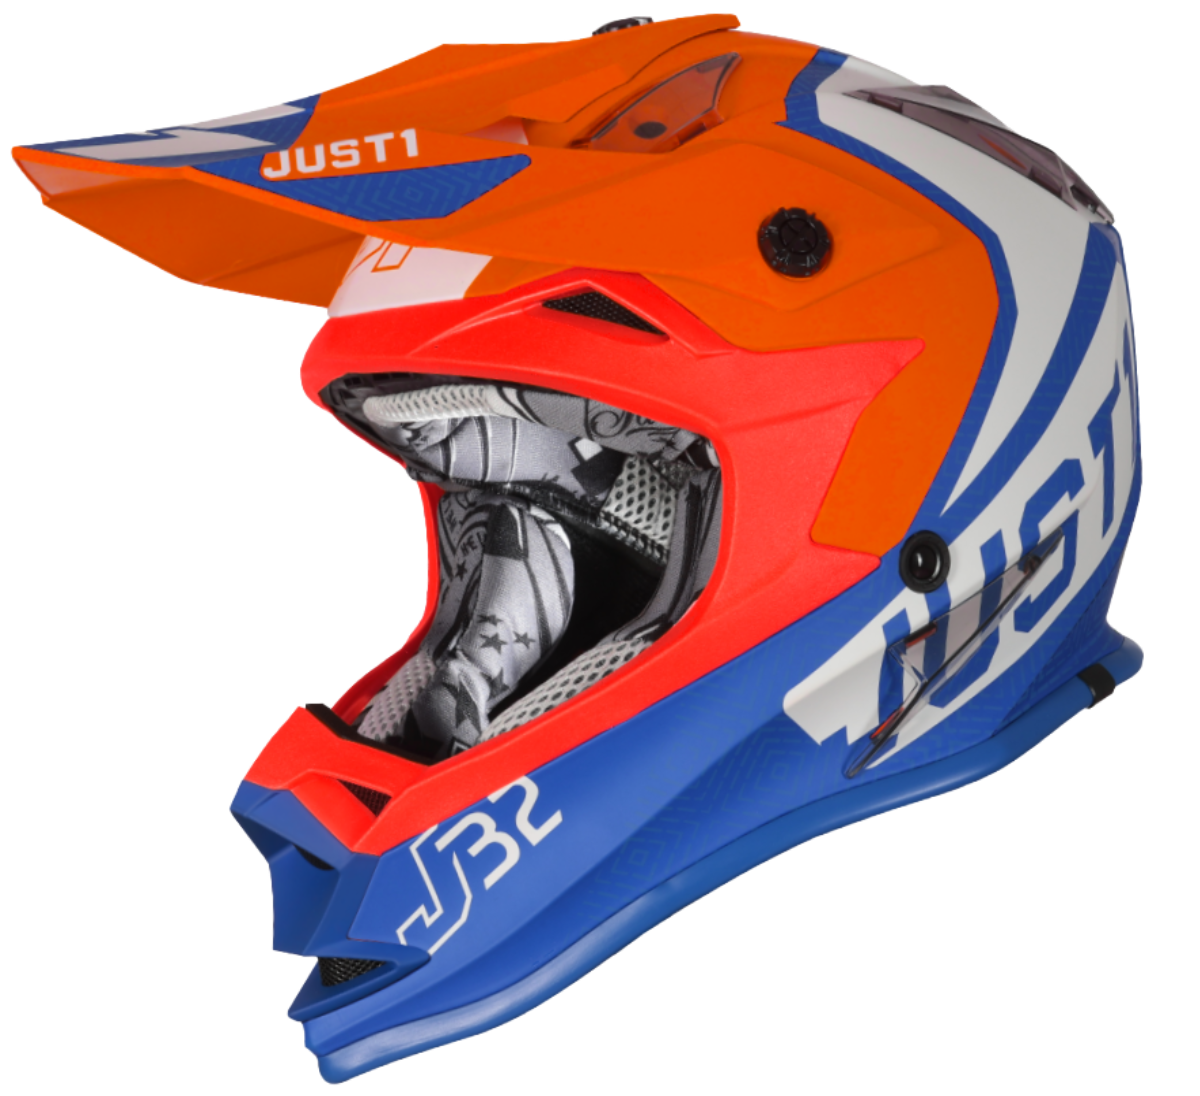 kask just1 j32